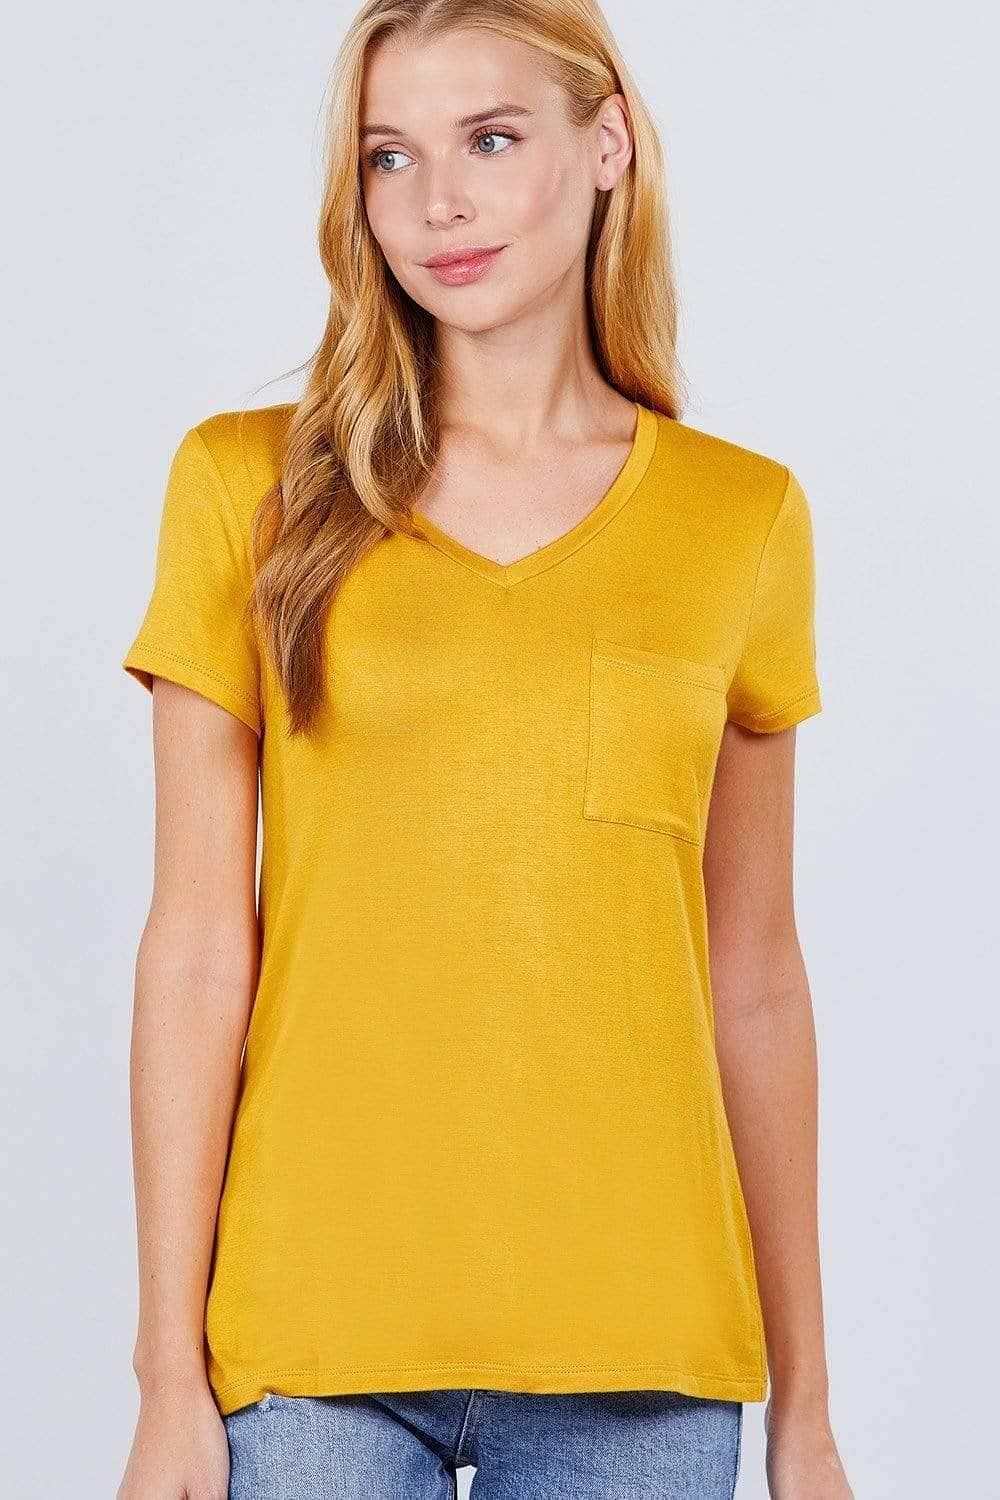 Mustard Short Sleeve V-Neck Rayon Jersey - Shopping Therapy S Tops